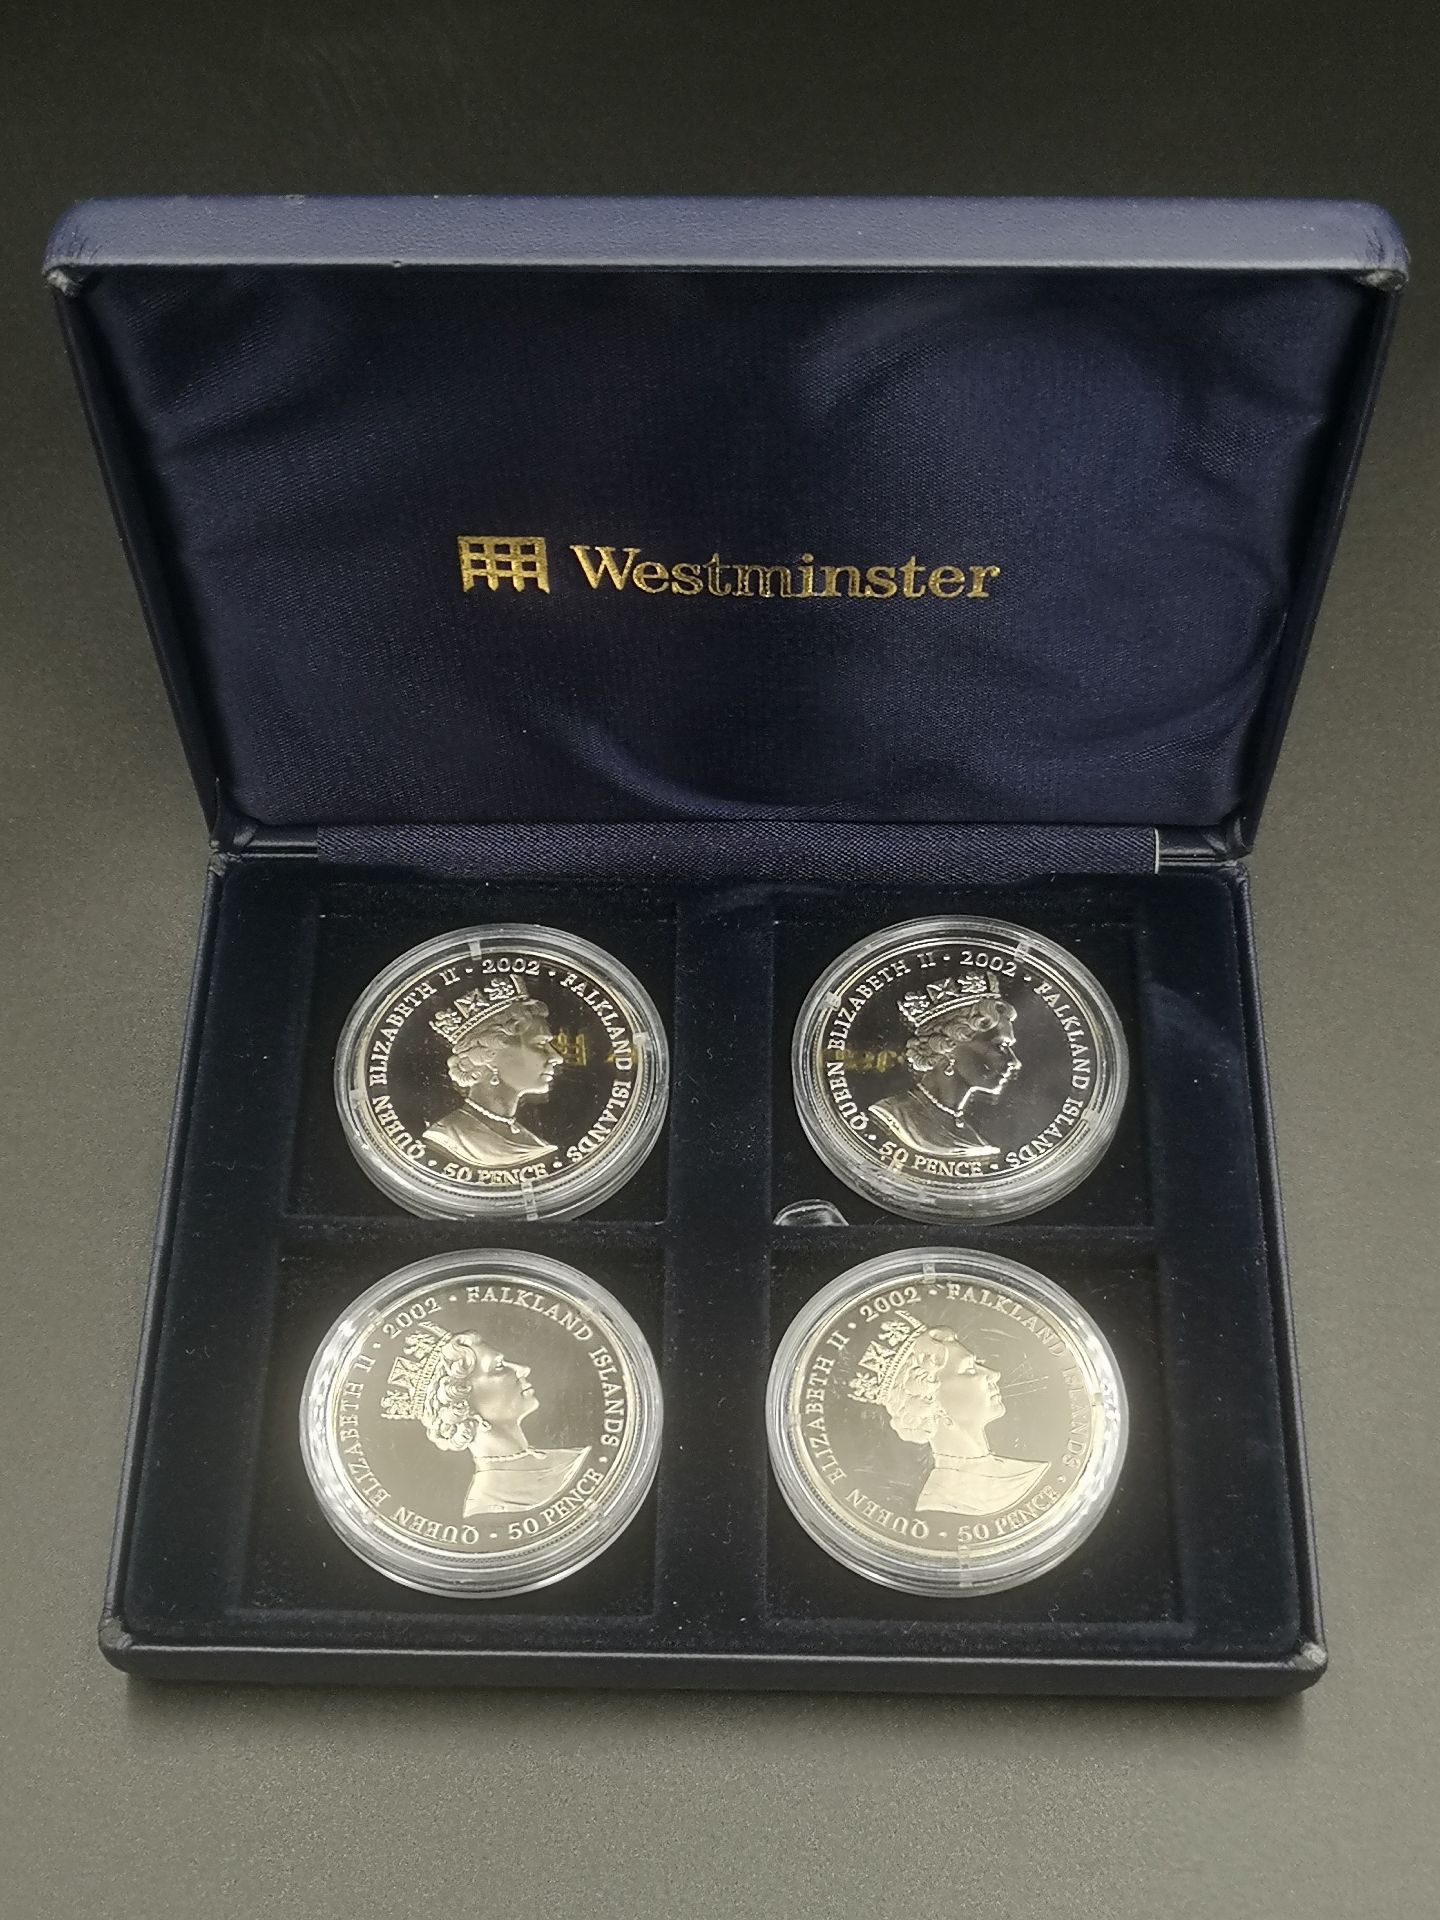 Westminster Diamond Wedding silver proof pair and other coins - Image 2 of 4